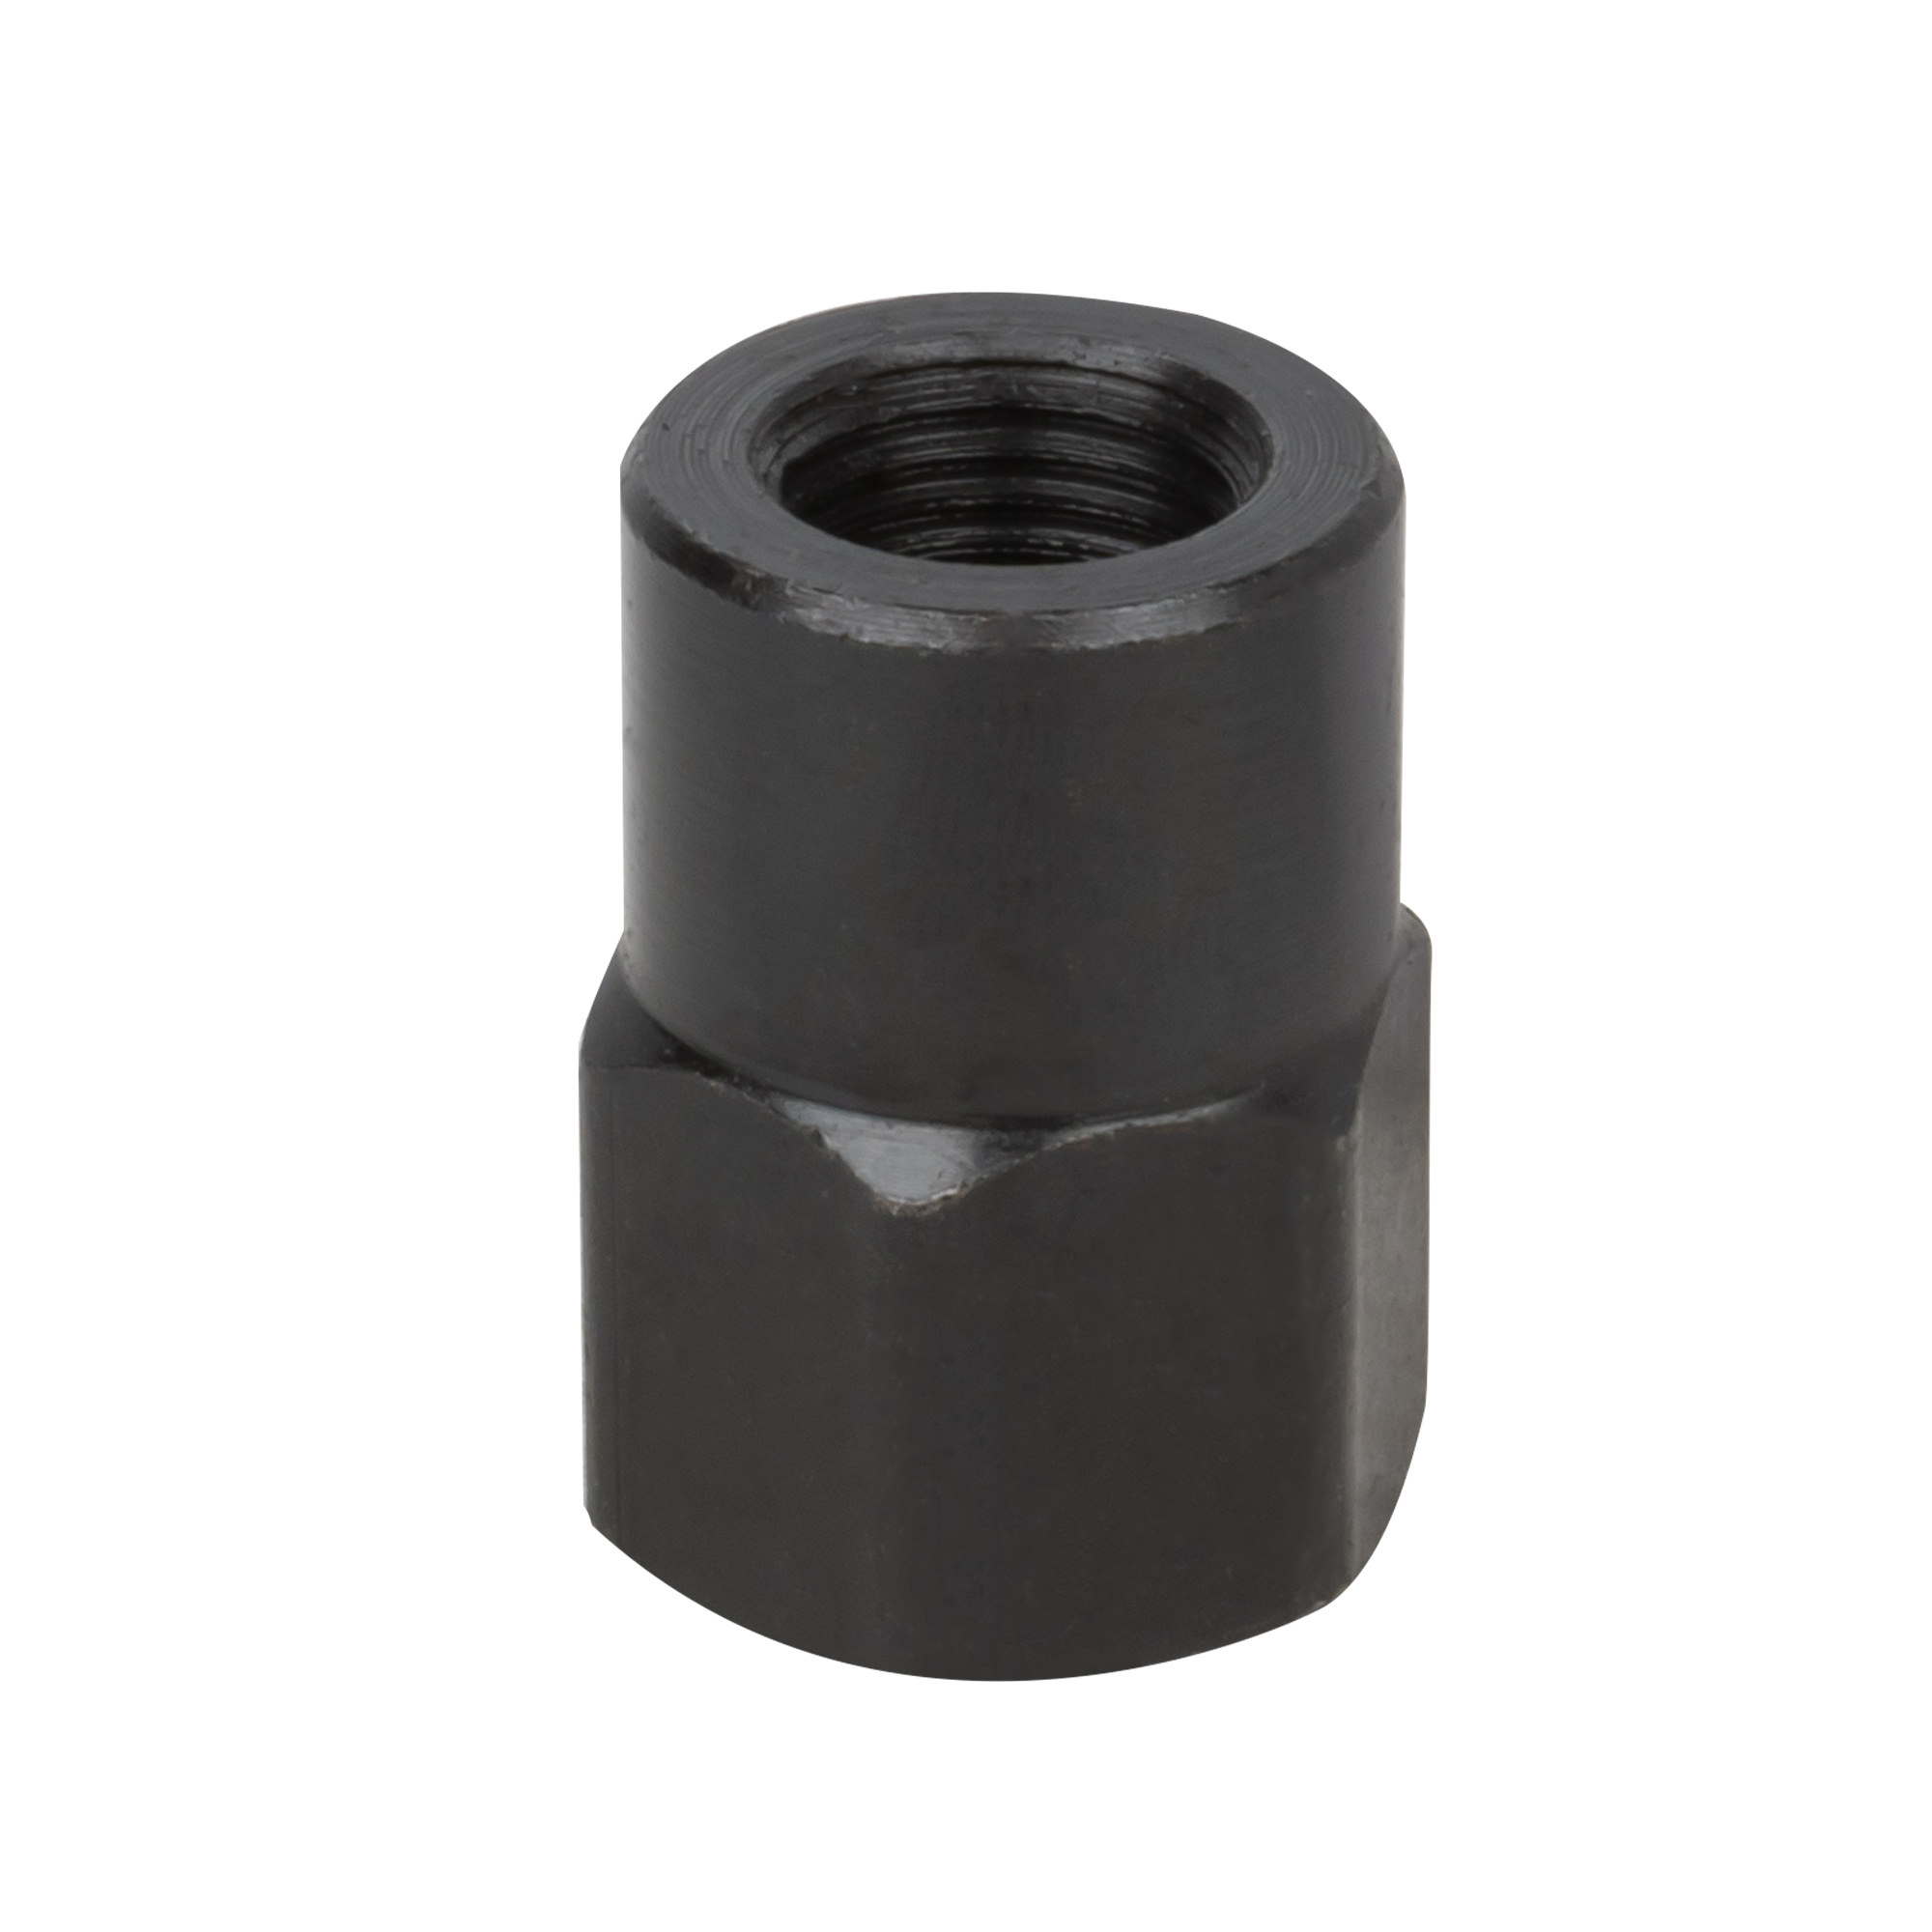 ADAPTER M16X1,5 18MM FOR INJECTOR PULLER 54186